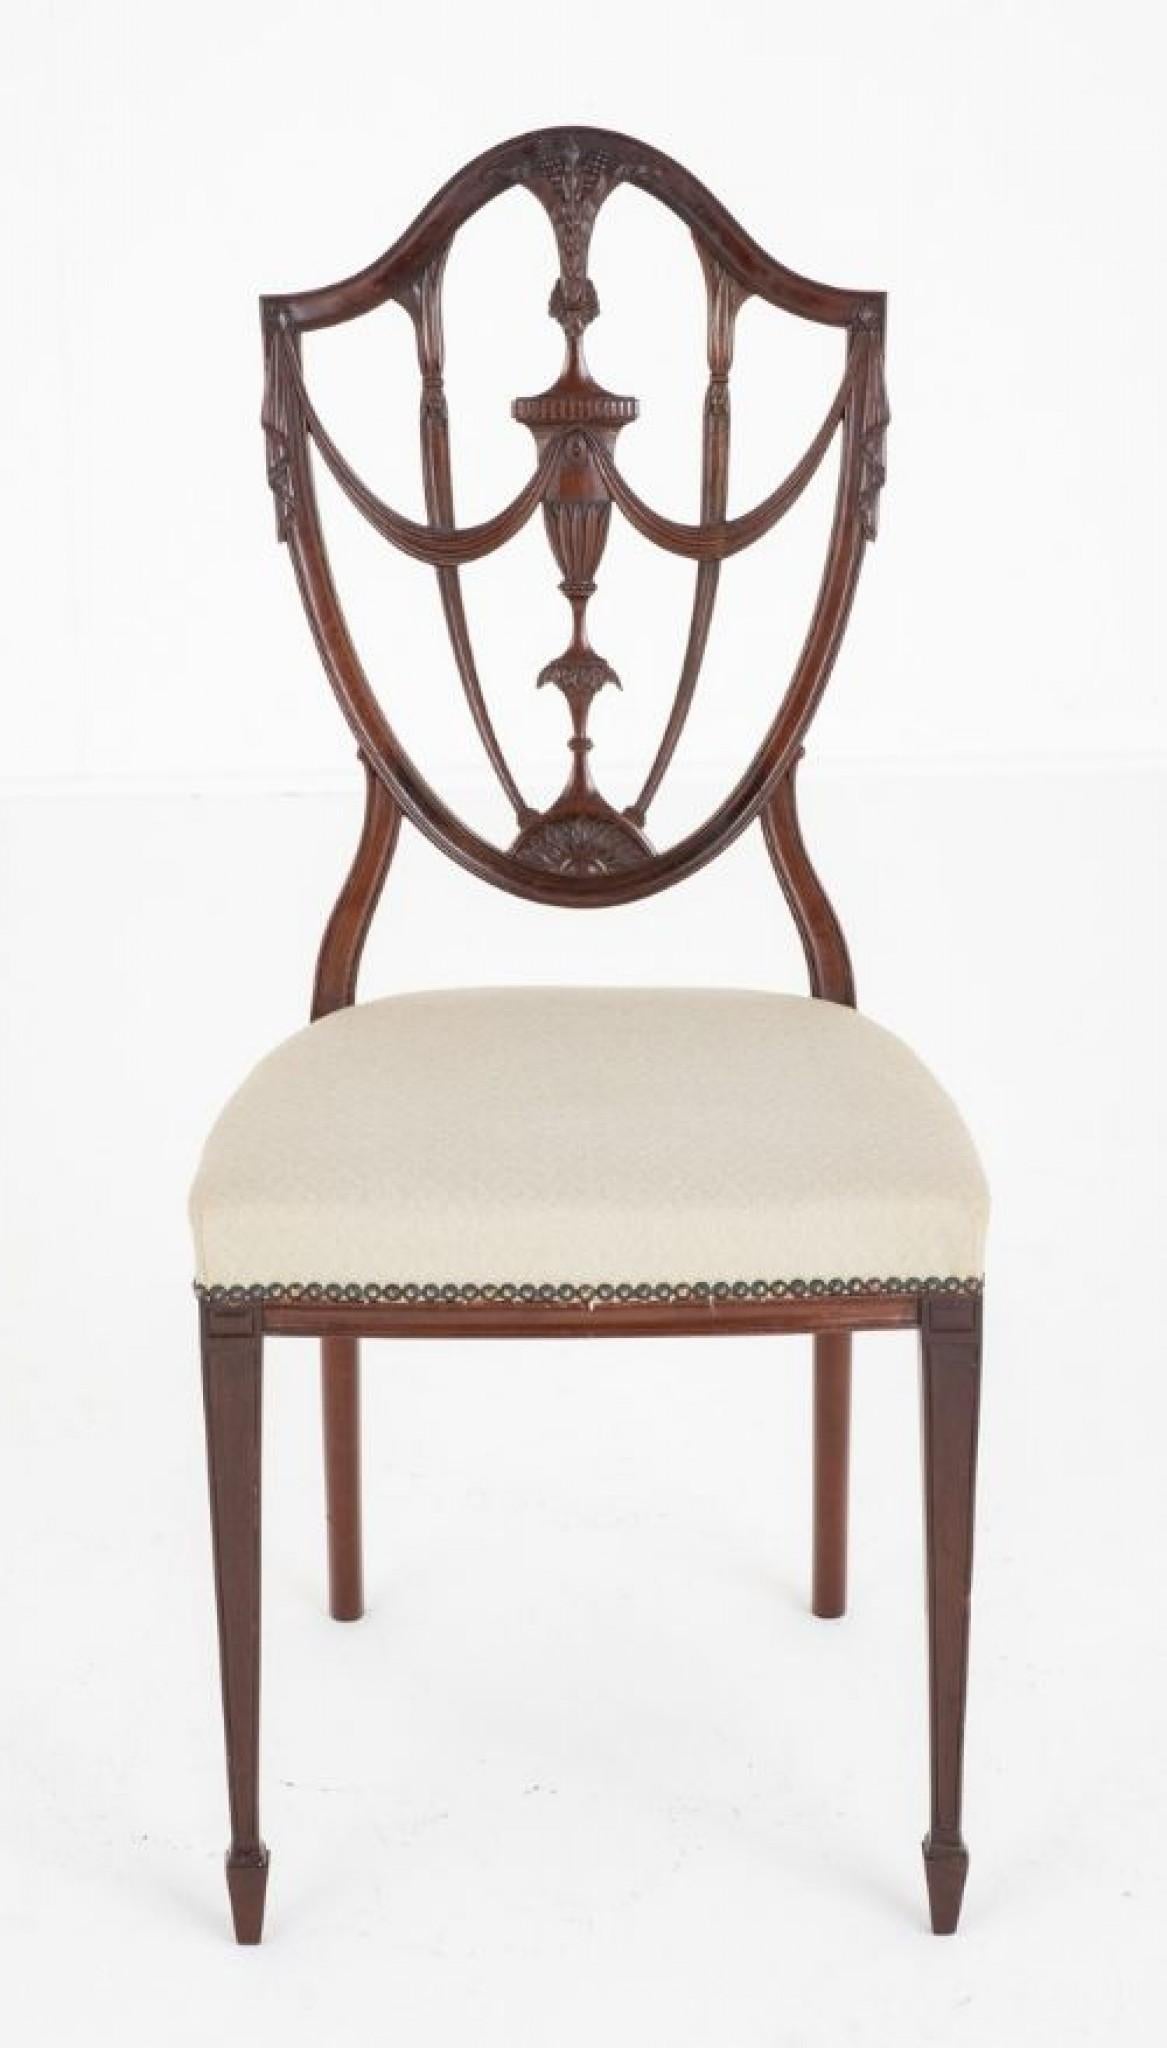 Hepplewhite Revival Mahogany Side Chair. 
The Back of the Chair Being of a Shield Form with a Carved Urn and Drapes.
Circa 1900
Please scroll through for more pix - this ships anywhere, please get in touch  
The Top of the Chair Featuring a Carved